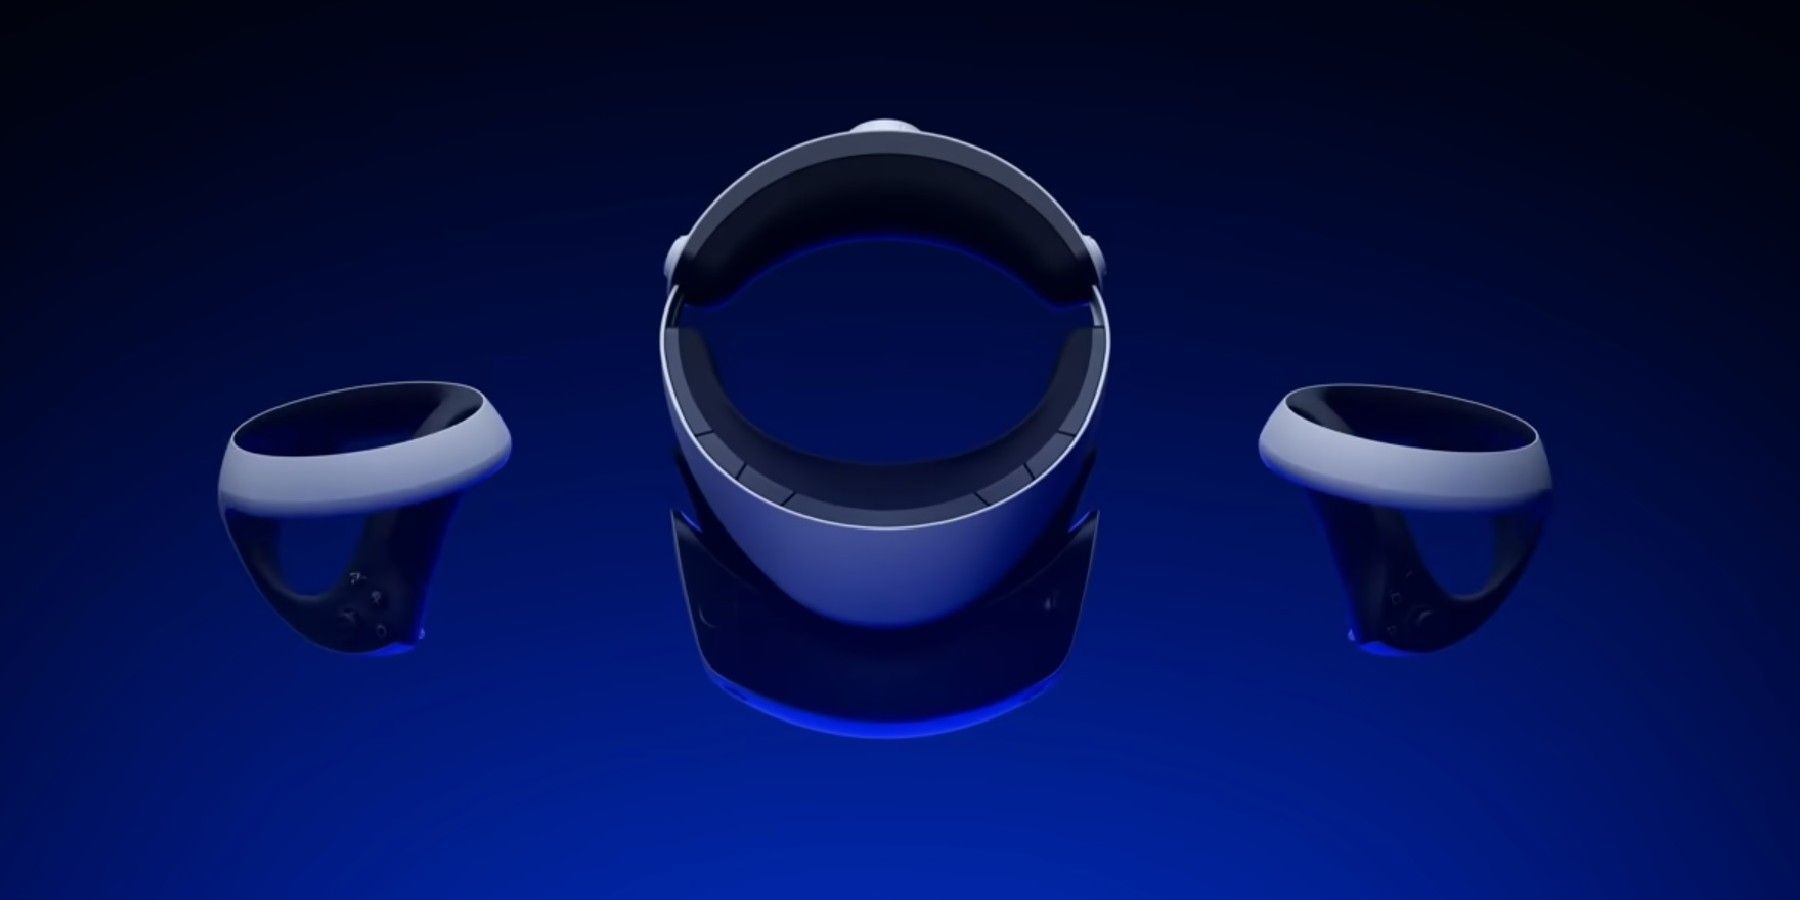 Bloomberg: PlayStation VR2 headset has had a weak start, analysts